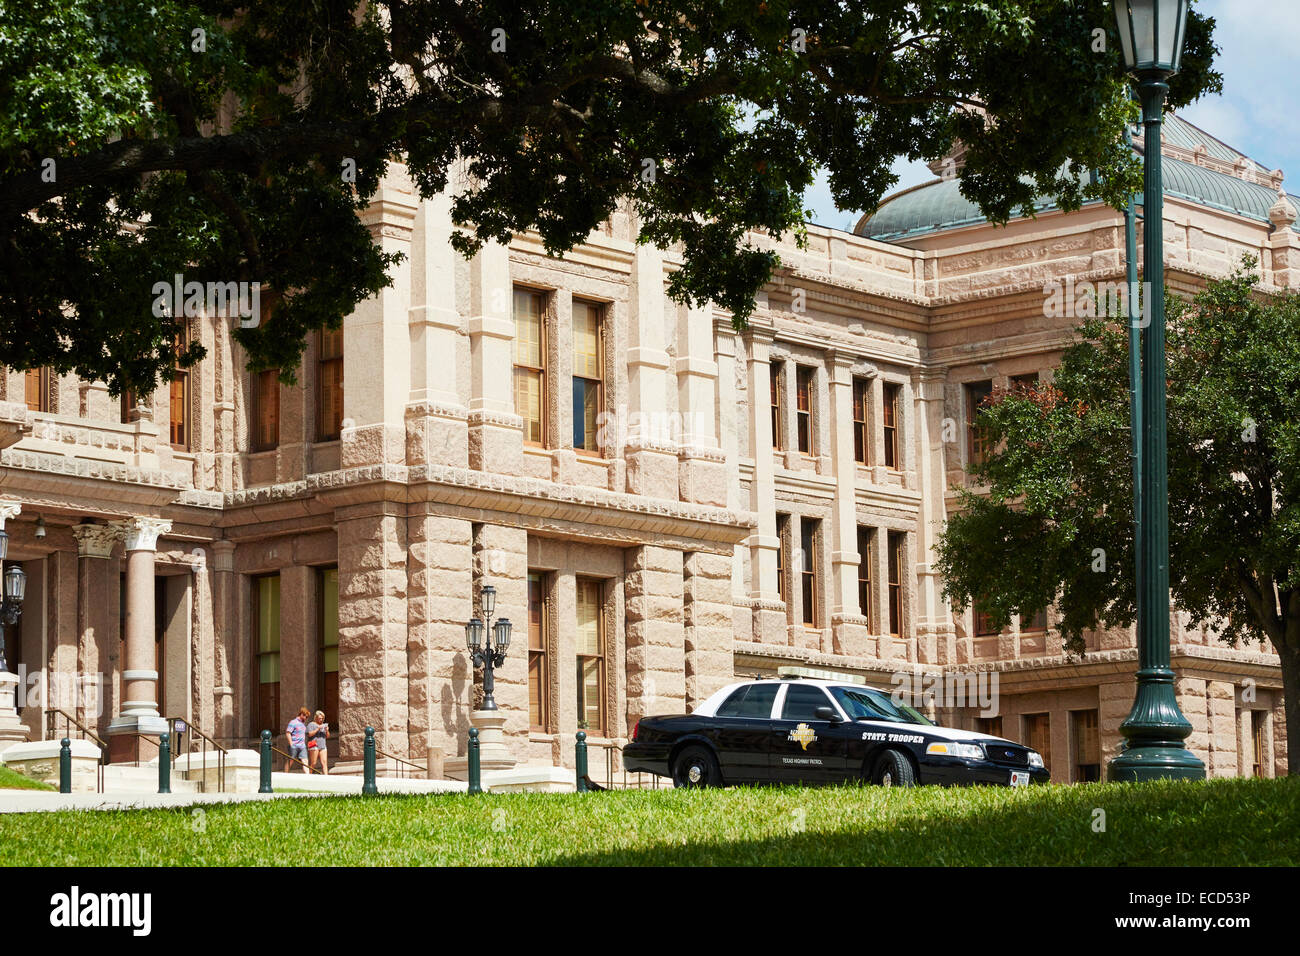 State Capitol Building, Austin, Texas, USA with State Trooper vehicle parked outside. Stock Photo